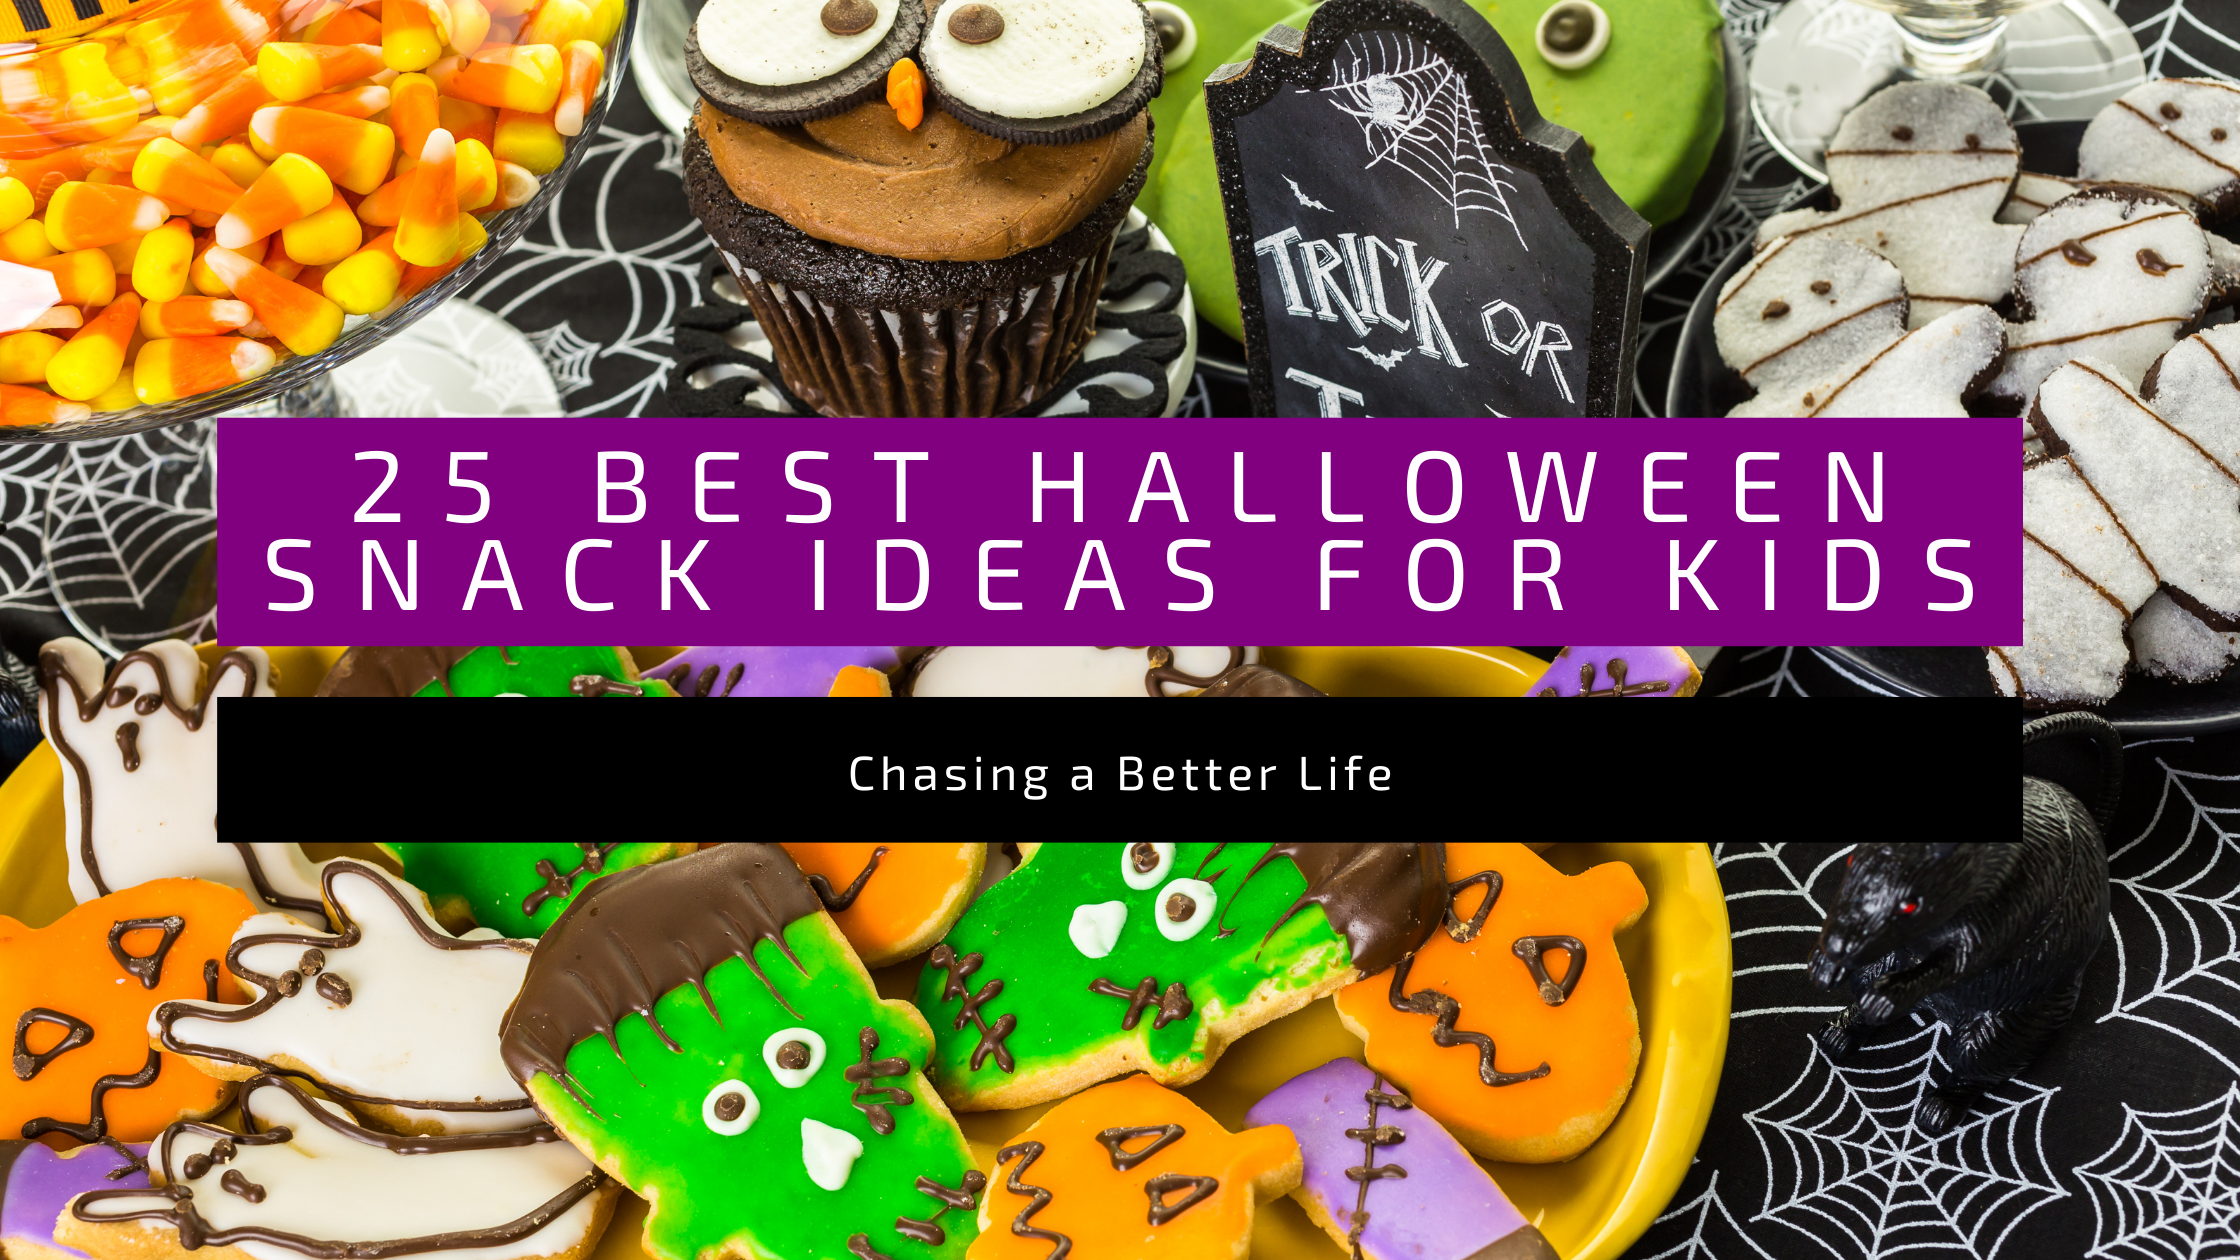 The 25 Best Halloween Snack Ideas for Kids 10